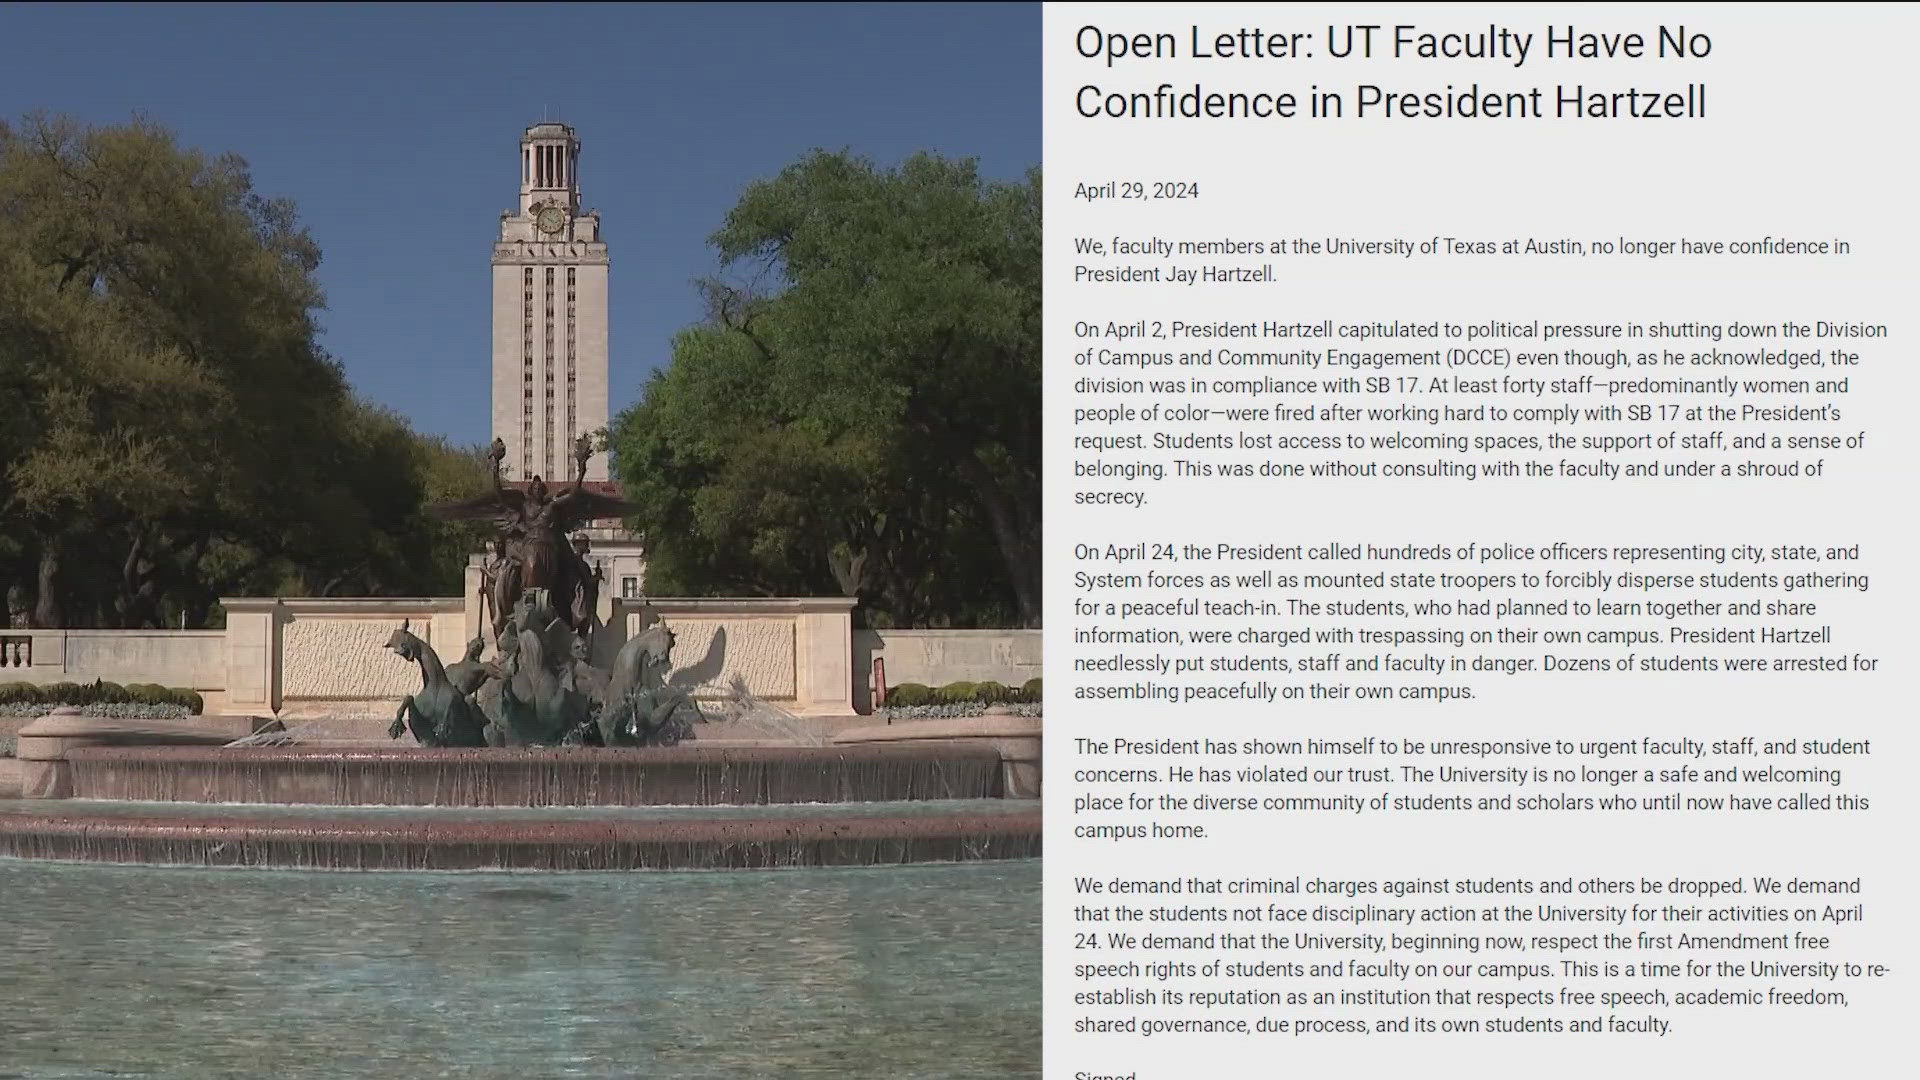 The faculty members are supporting a no-confidence vote against UT Austin president Jay Hartzell after DEI employees were let go and DPS was called during a protest.